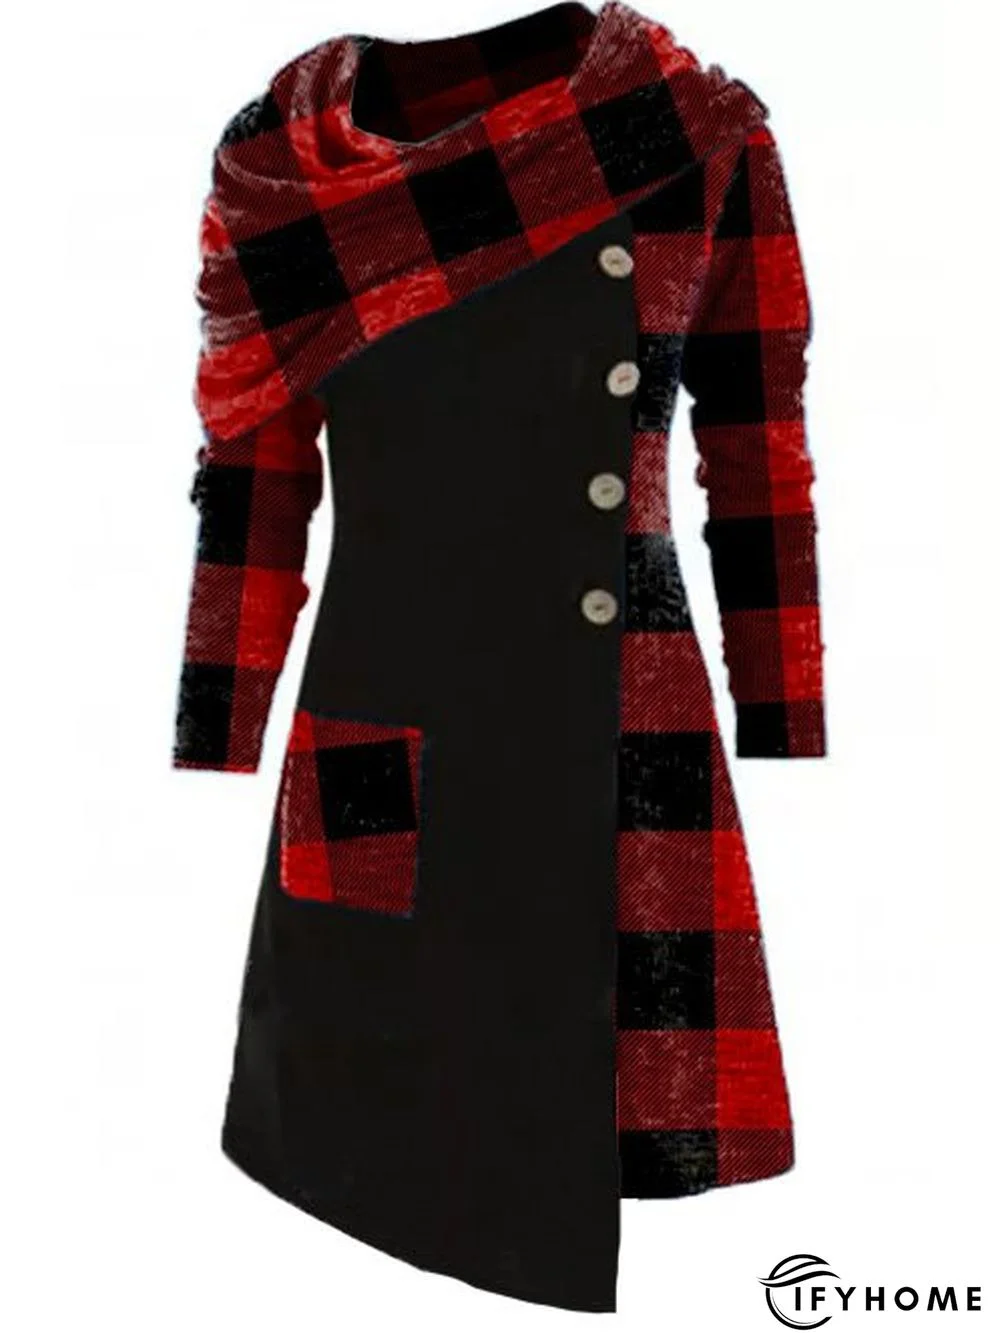 Checked/Plaid Casual Cowl Neck Knitting Dress | IFYHOME